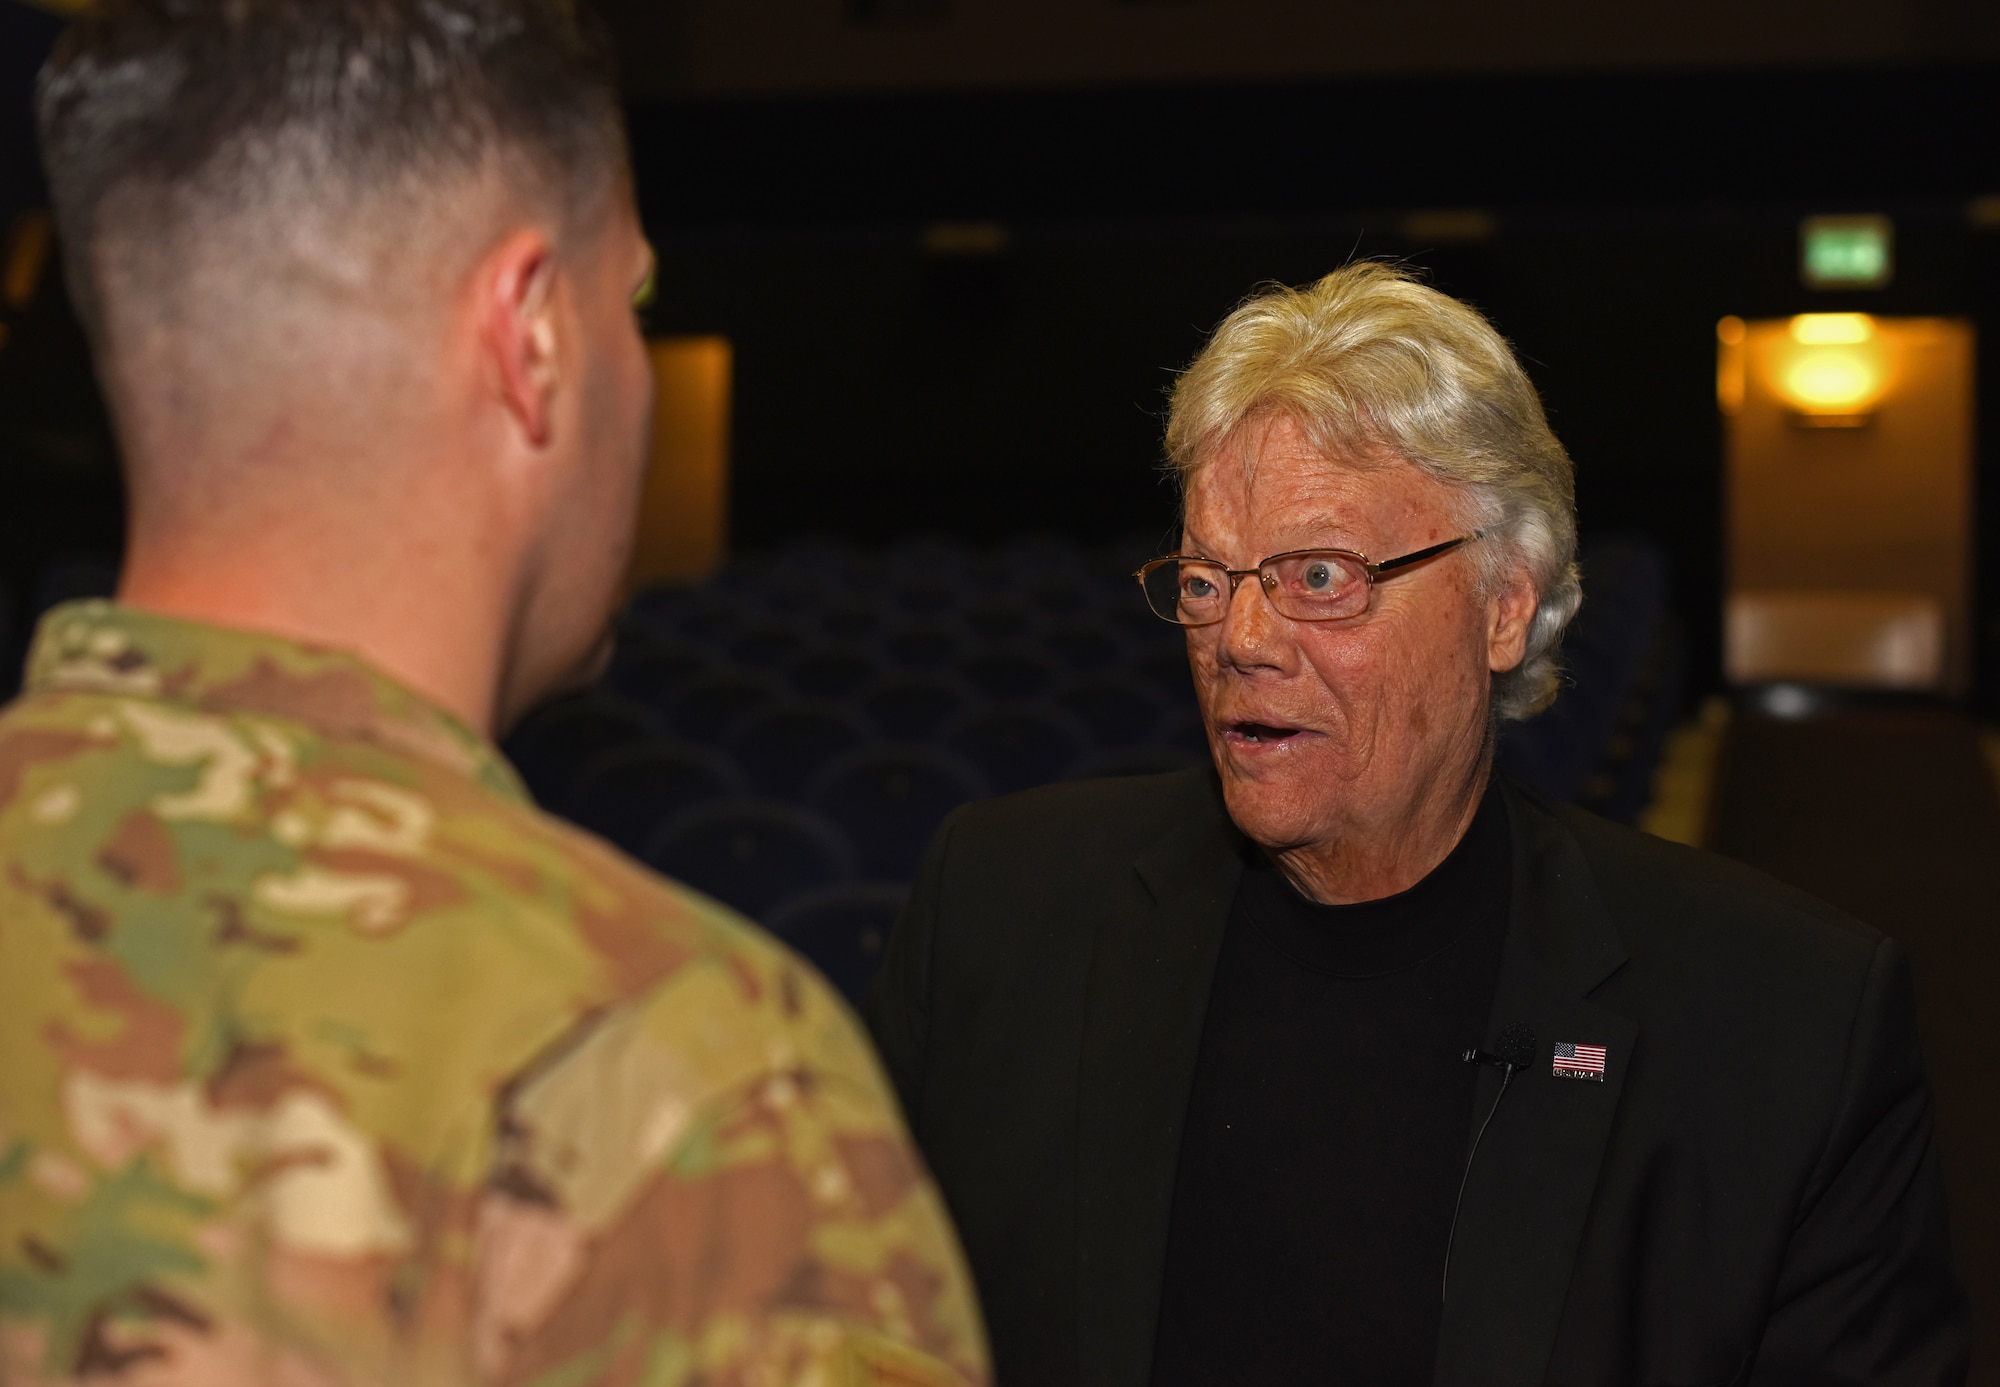 Dave Roever, Vietnam War veteran and Purple Heart recipient, speaks with U.S. Air Force Tech. Sgt. Marcelo Sierra, 100th Air Refueling Wing executive assistant to the command chief, during a visit at RAF Mildenhall, England, Nov. 6, 2018. Roever has taken his message of integrated resiliency and suicide prevention to troops around the globe. (U.S. Air Force photo by Airman 1st Class Brandon Esau)